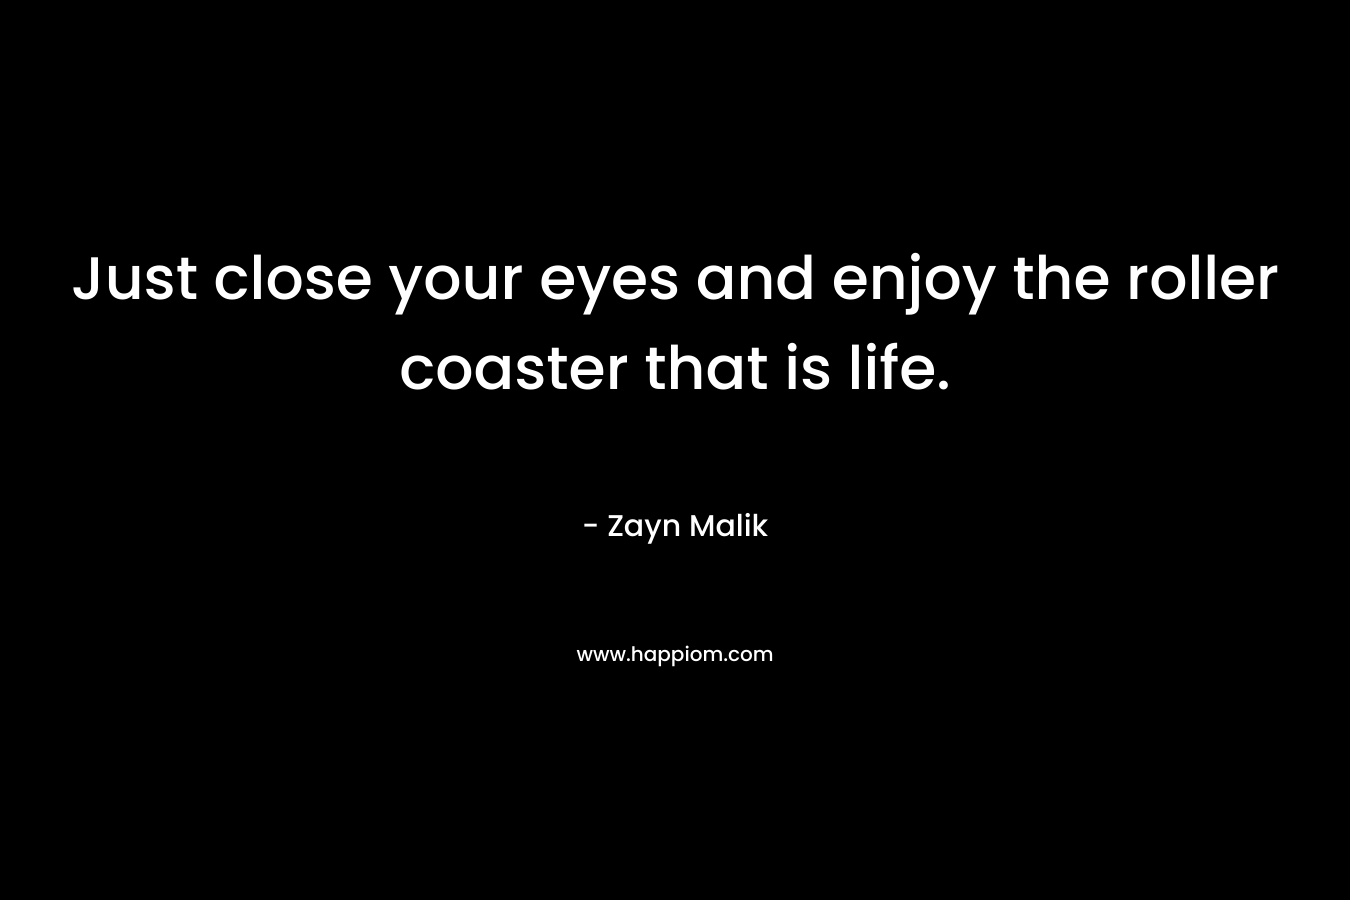 Just close your eyes and enjoy the roller coaster that is life. – Zayn Malik